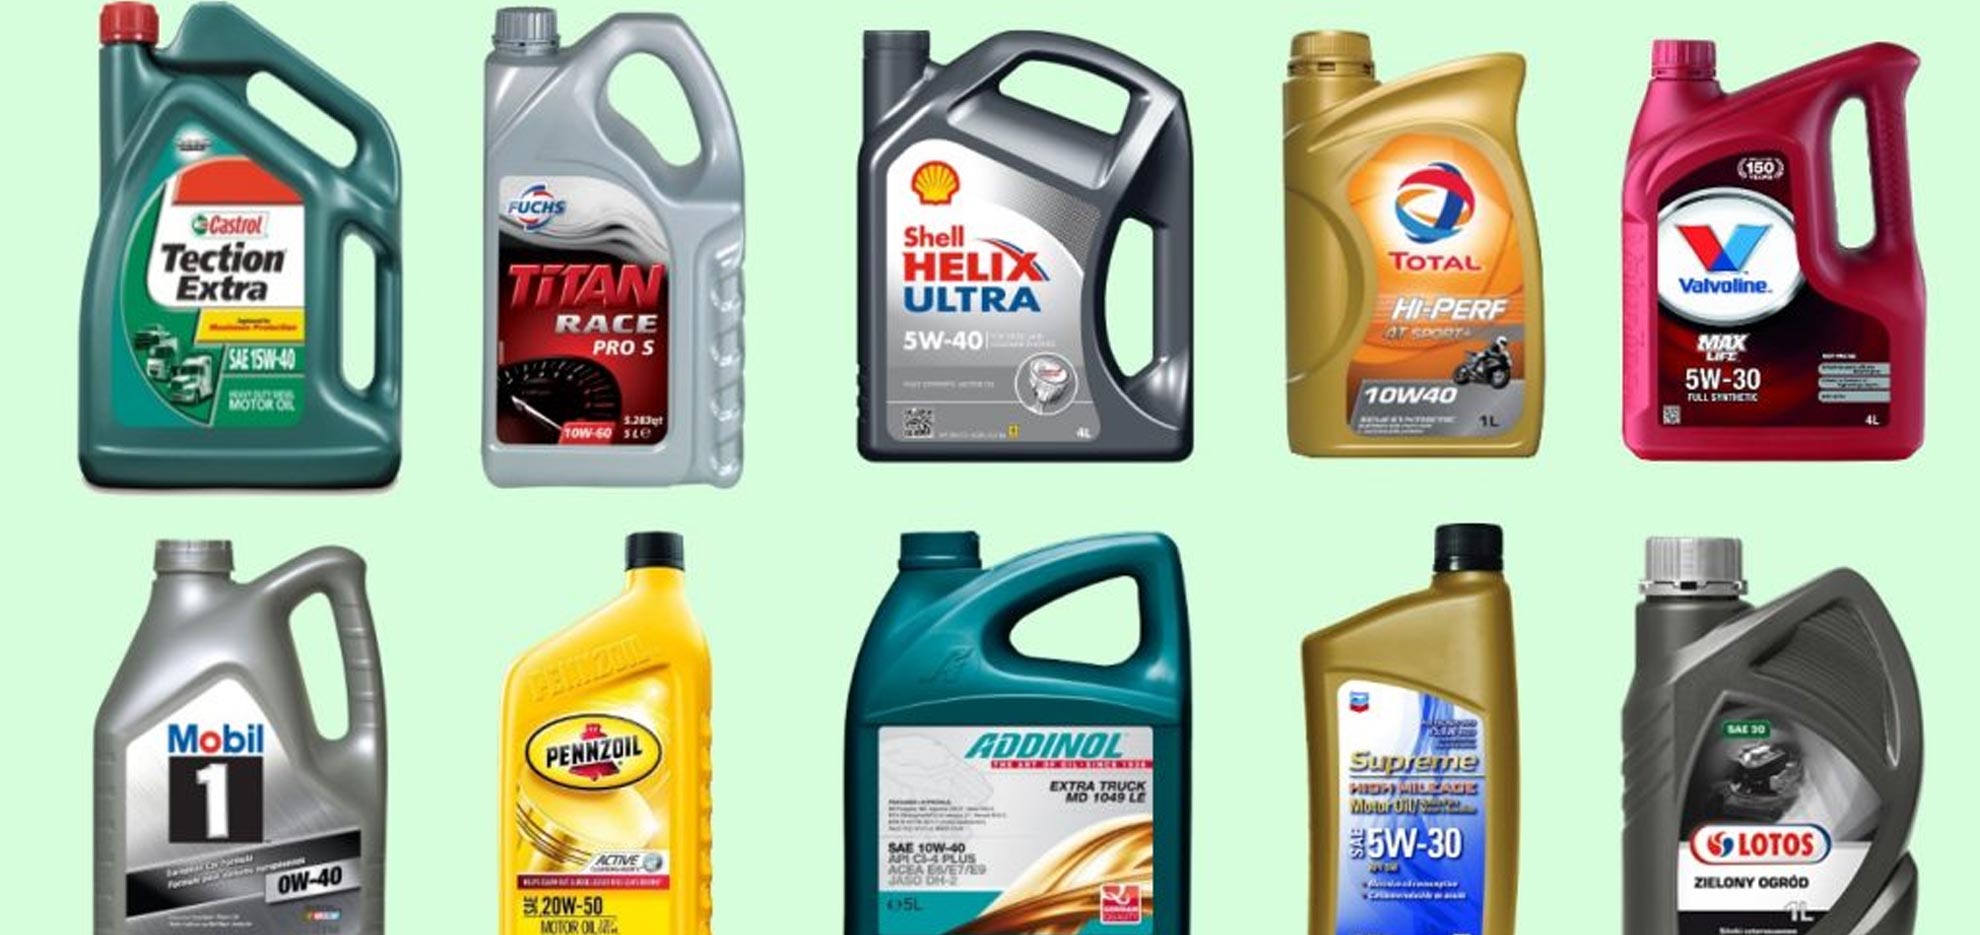 Marine Lubricant & Grease (Shell / Mobil / Castrol) Stockist